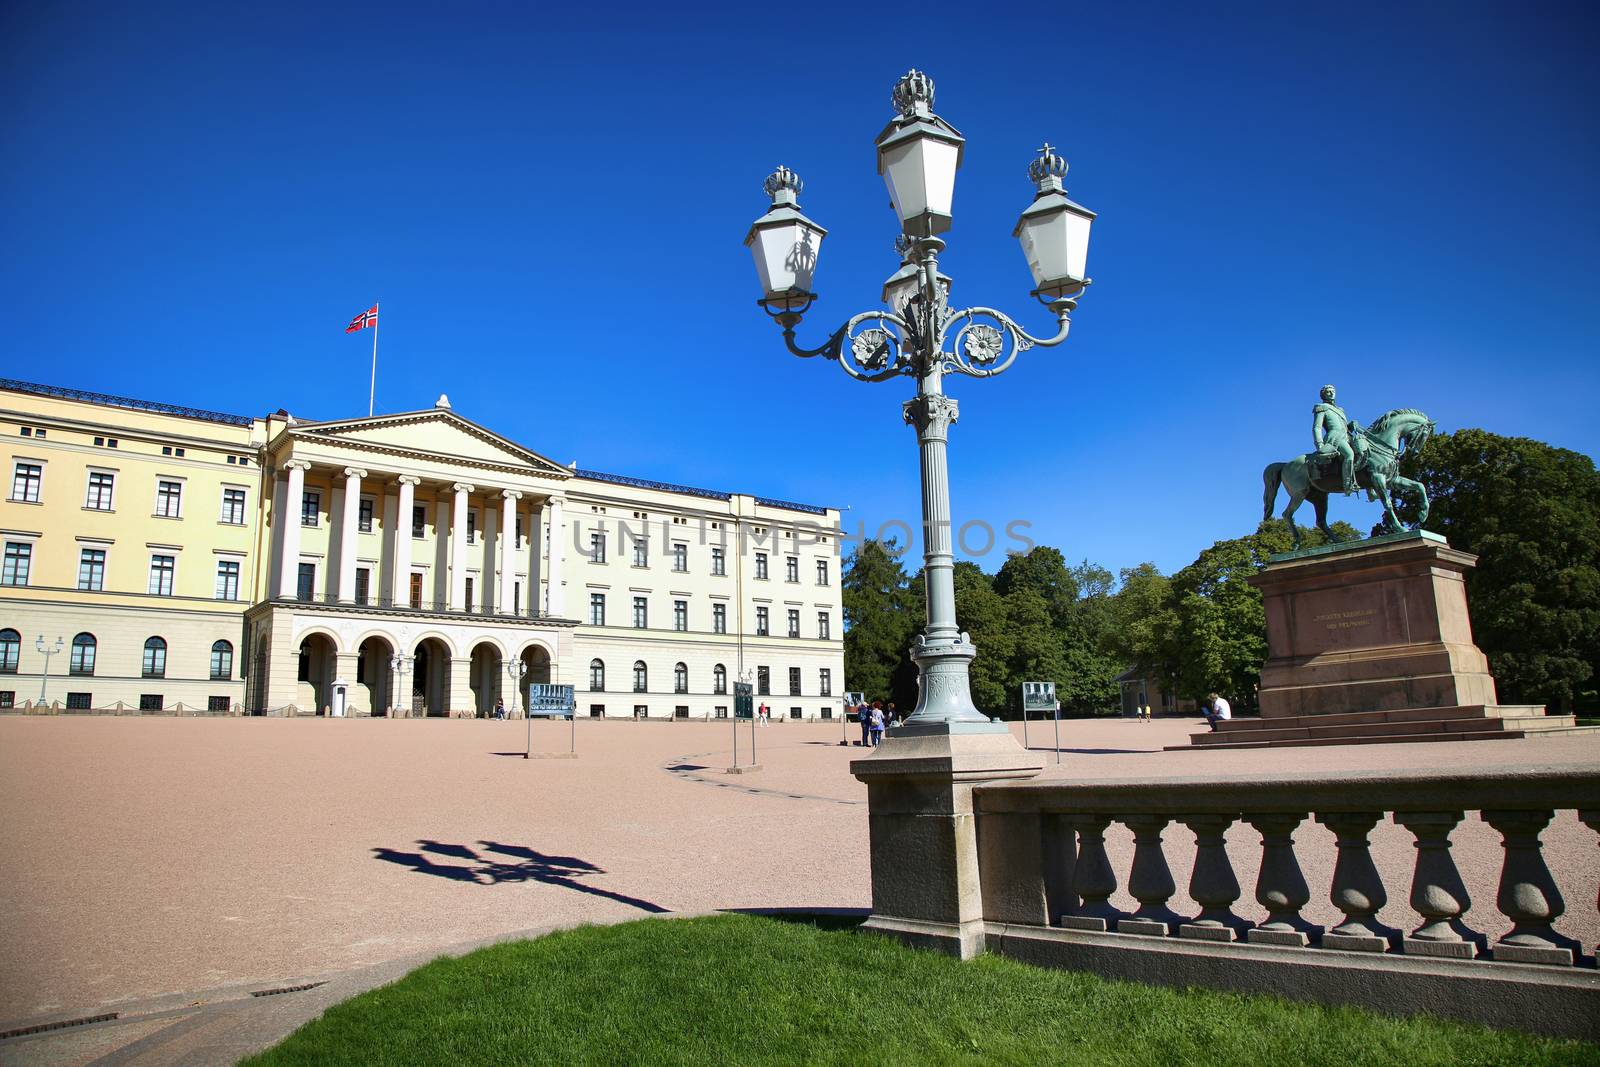 OSLO, NORWAY – AUGUST 17, 2016: Tourist visit The Royal Palace and statue of King Karl Johan XIV, Oslo is the capital city of Norway in Oslo, Norway on August 17,2016.